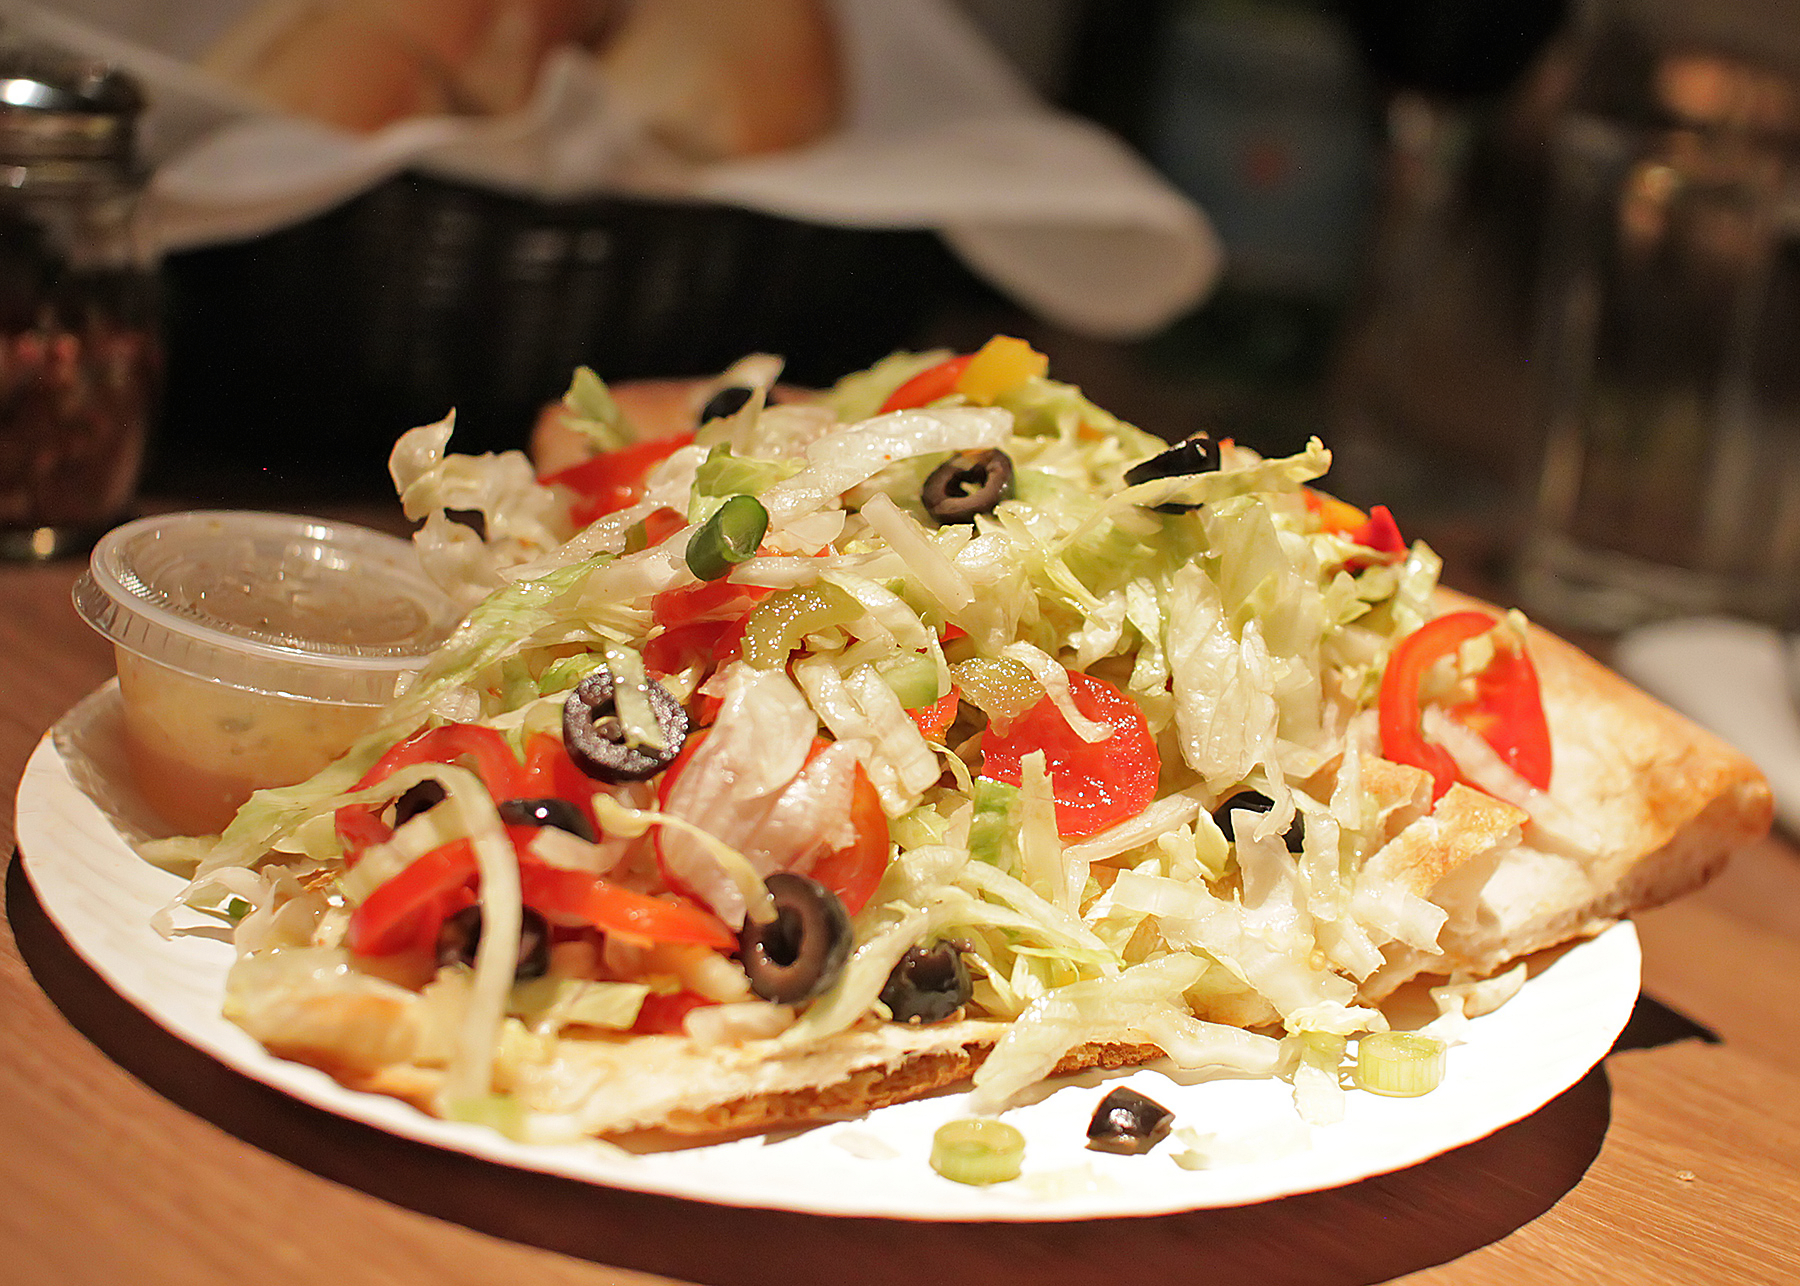 BRANCHINELLIS IN MILLER PLACE : SALAD PIZZA